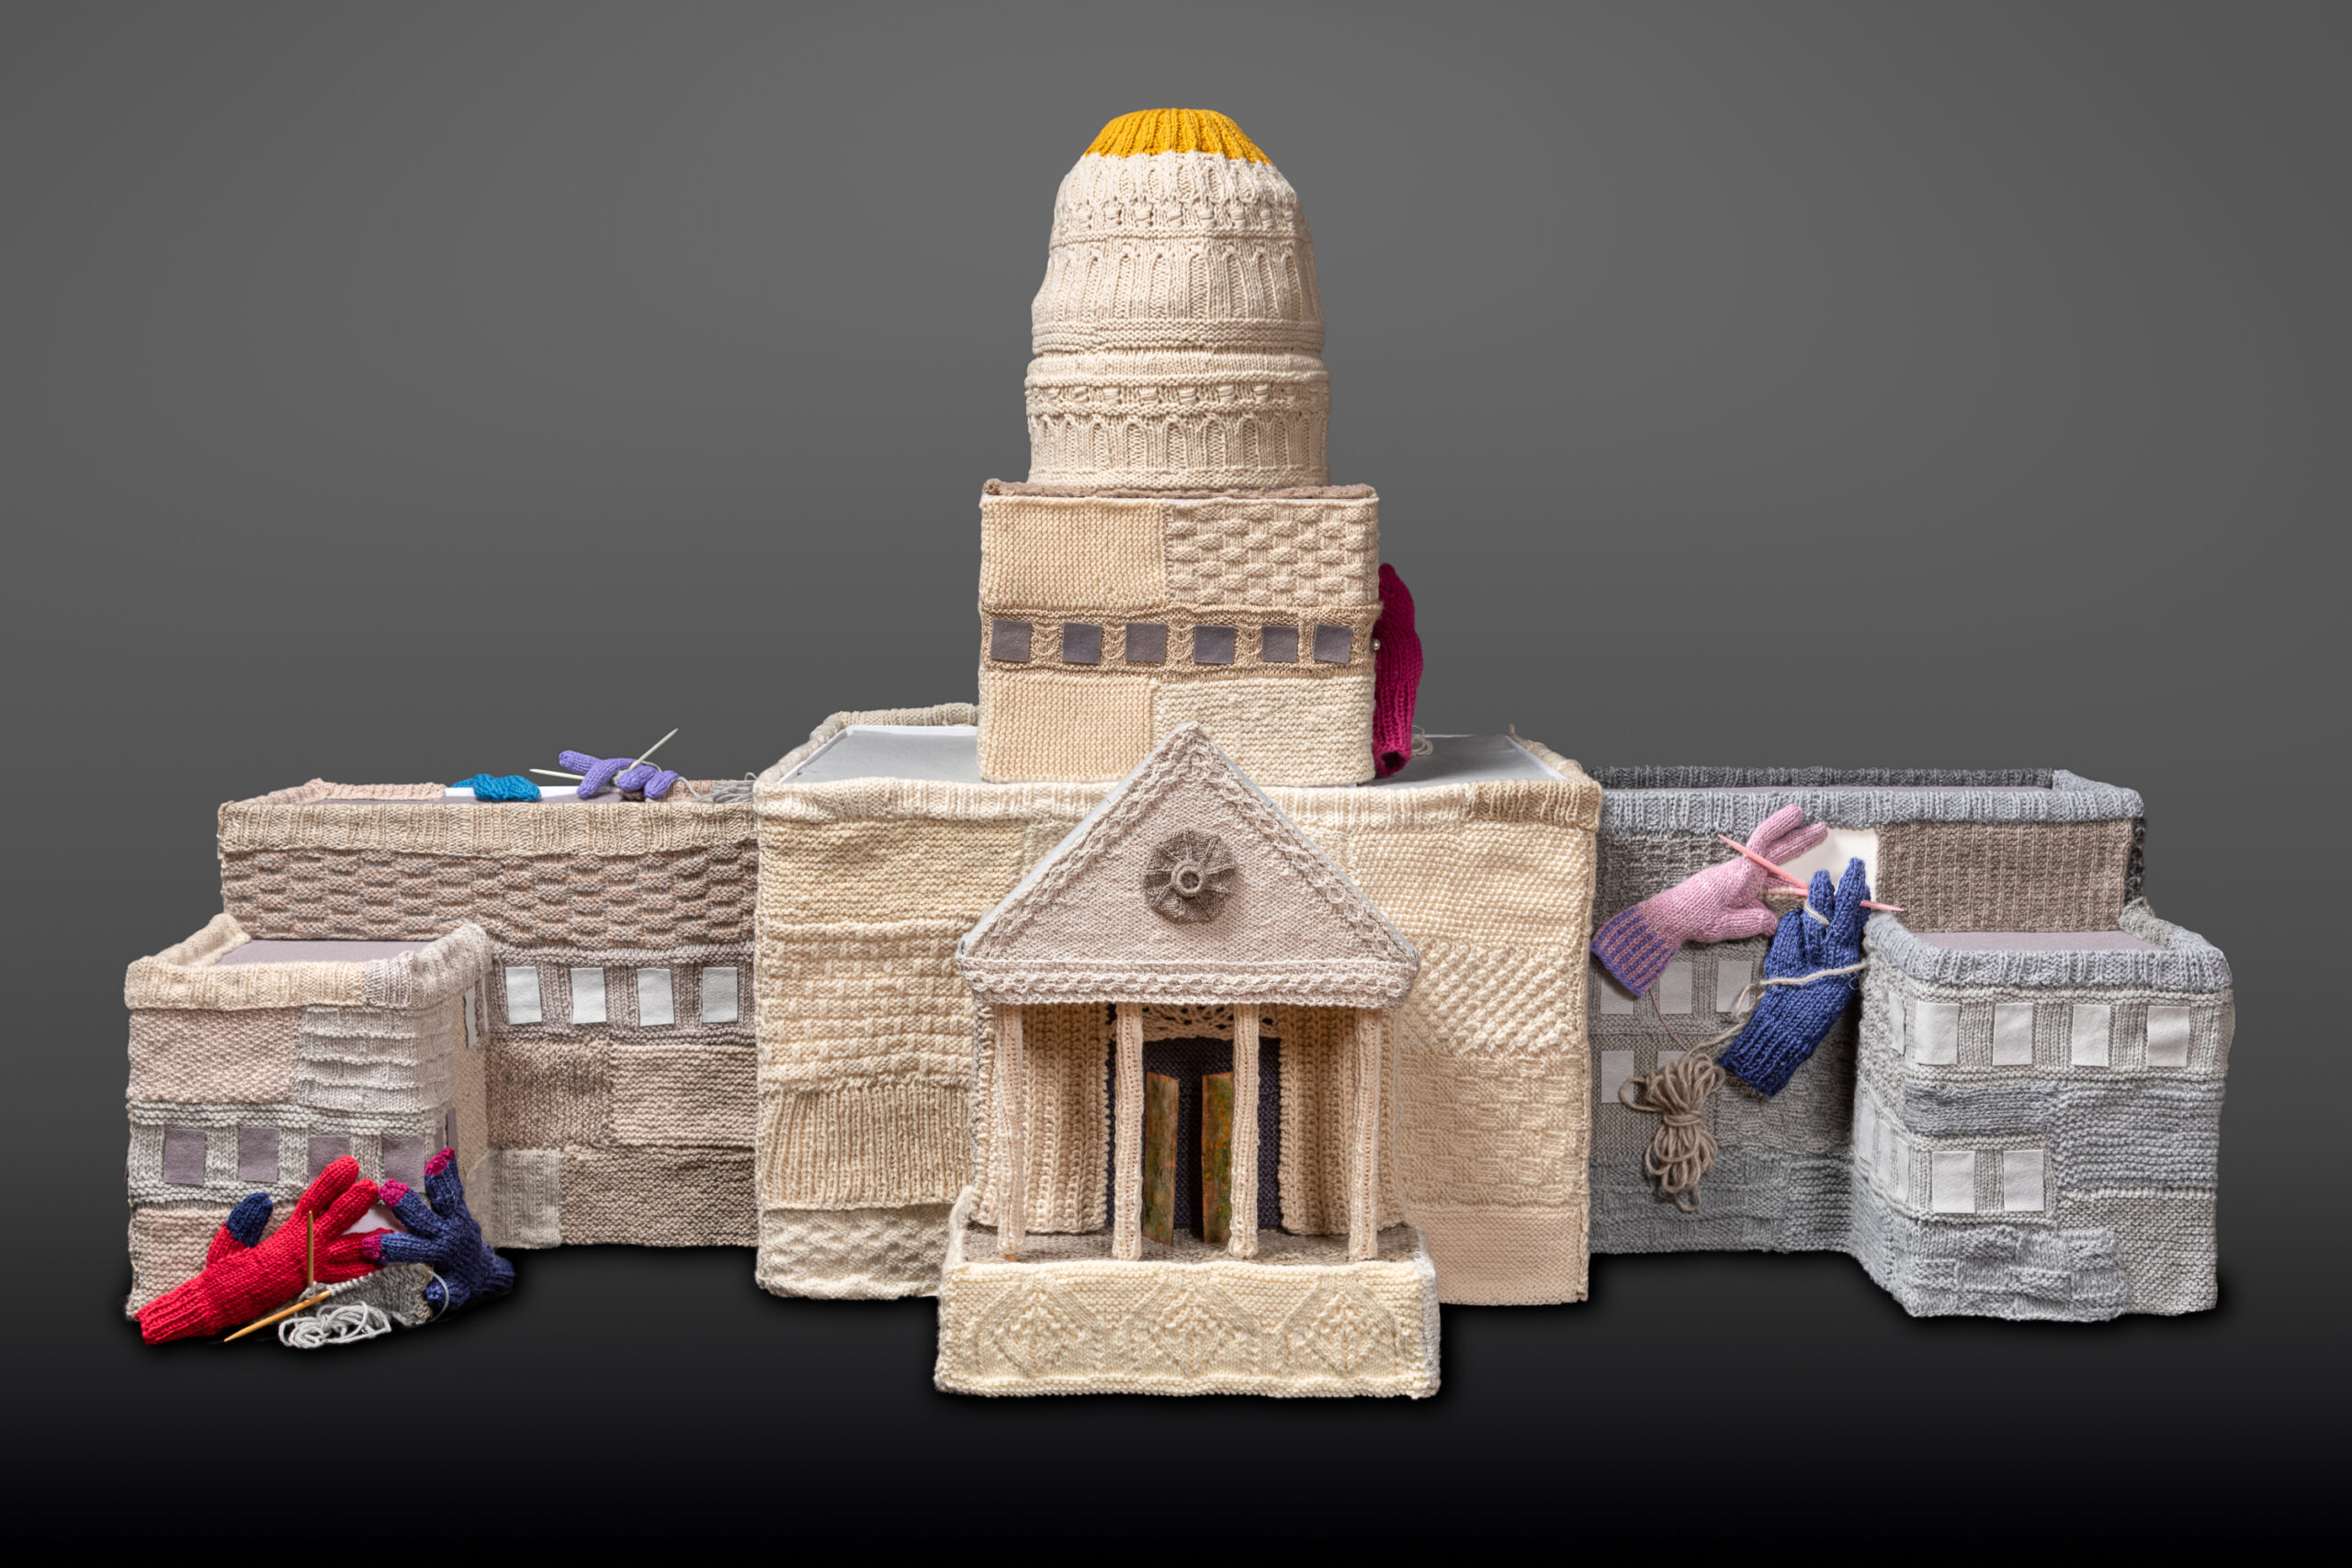 Capitol building made from knit materials artist Eve Jacobs Carnahan | on Art Biz Success